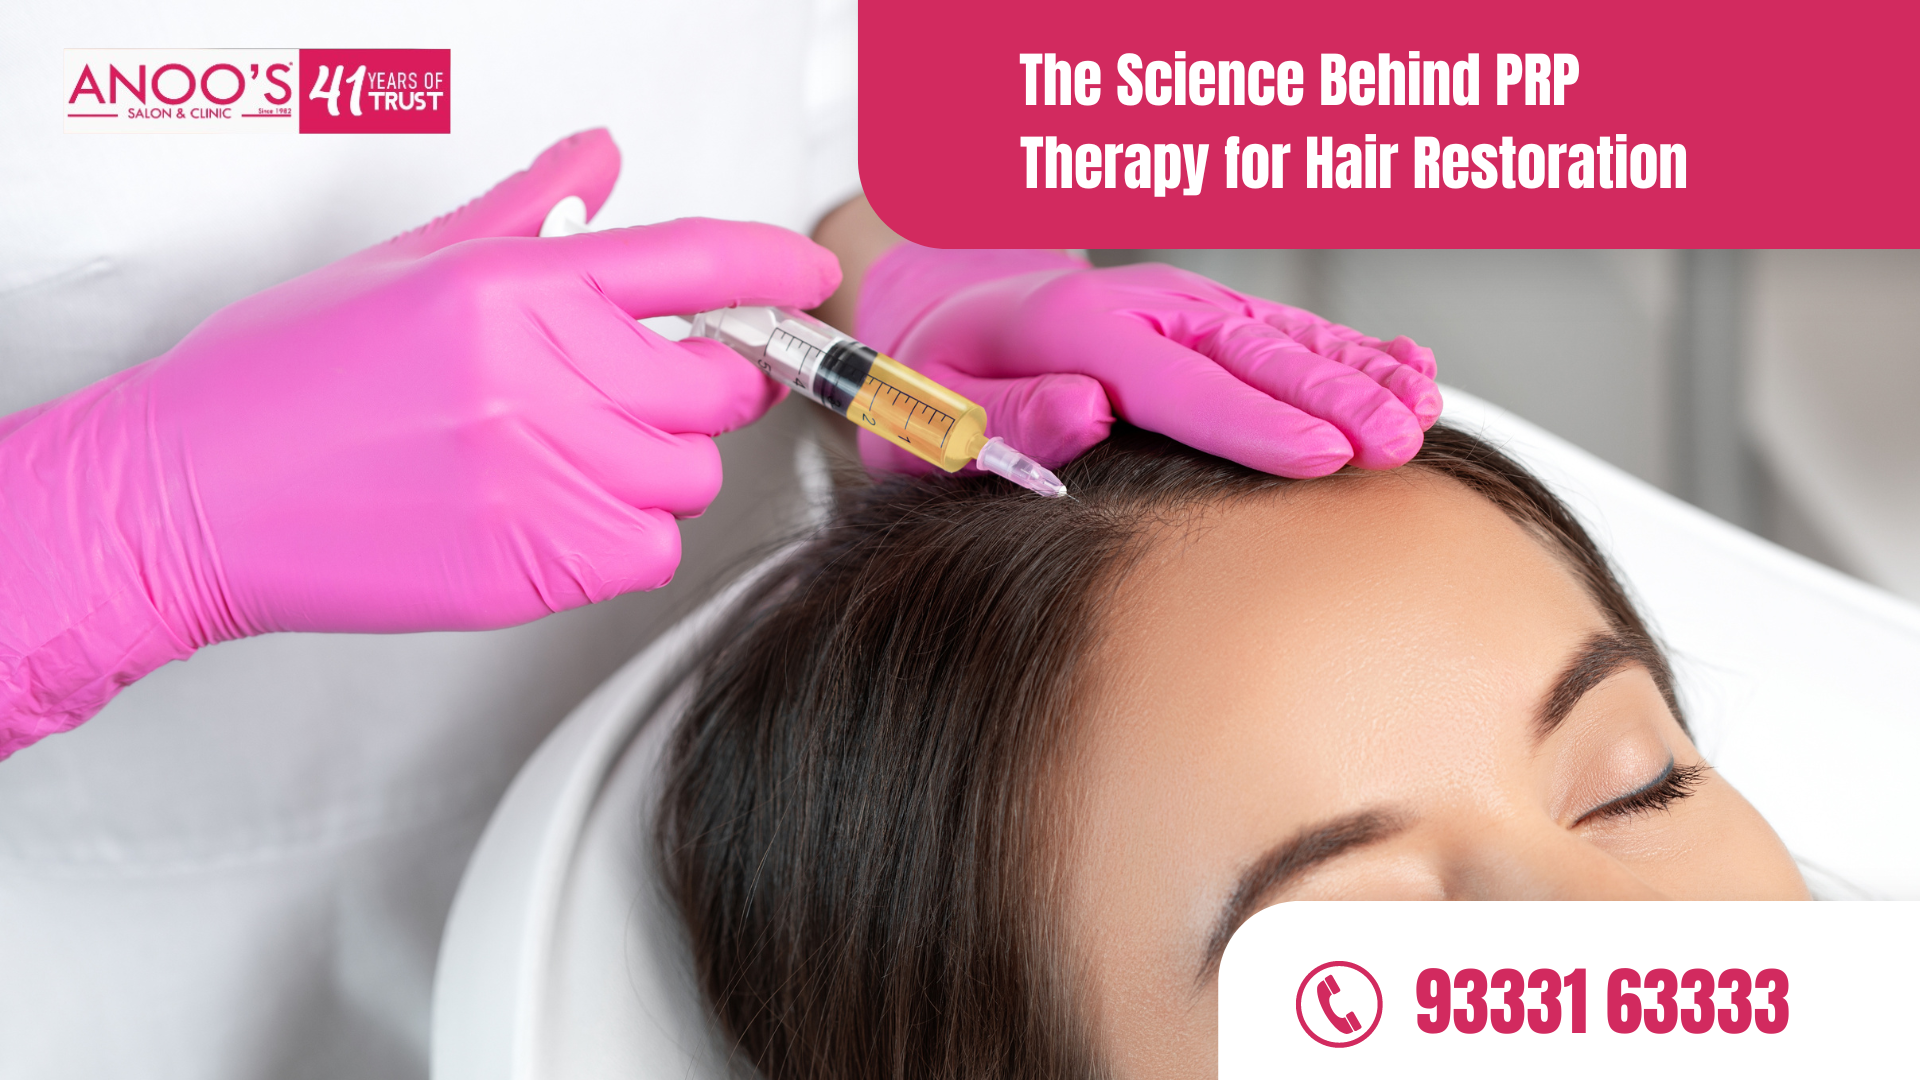 The Science Behind PRP Therapy for Hair Restoration